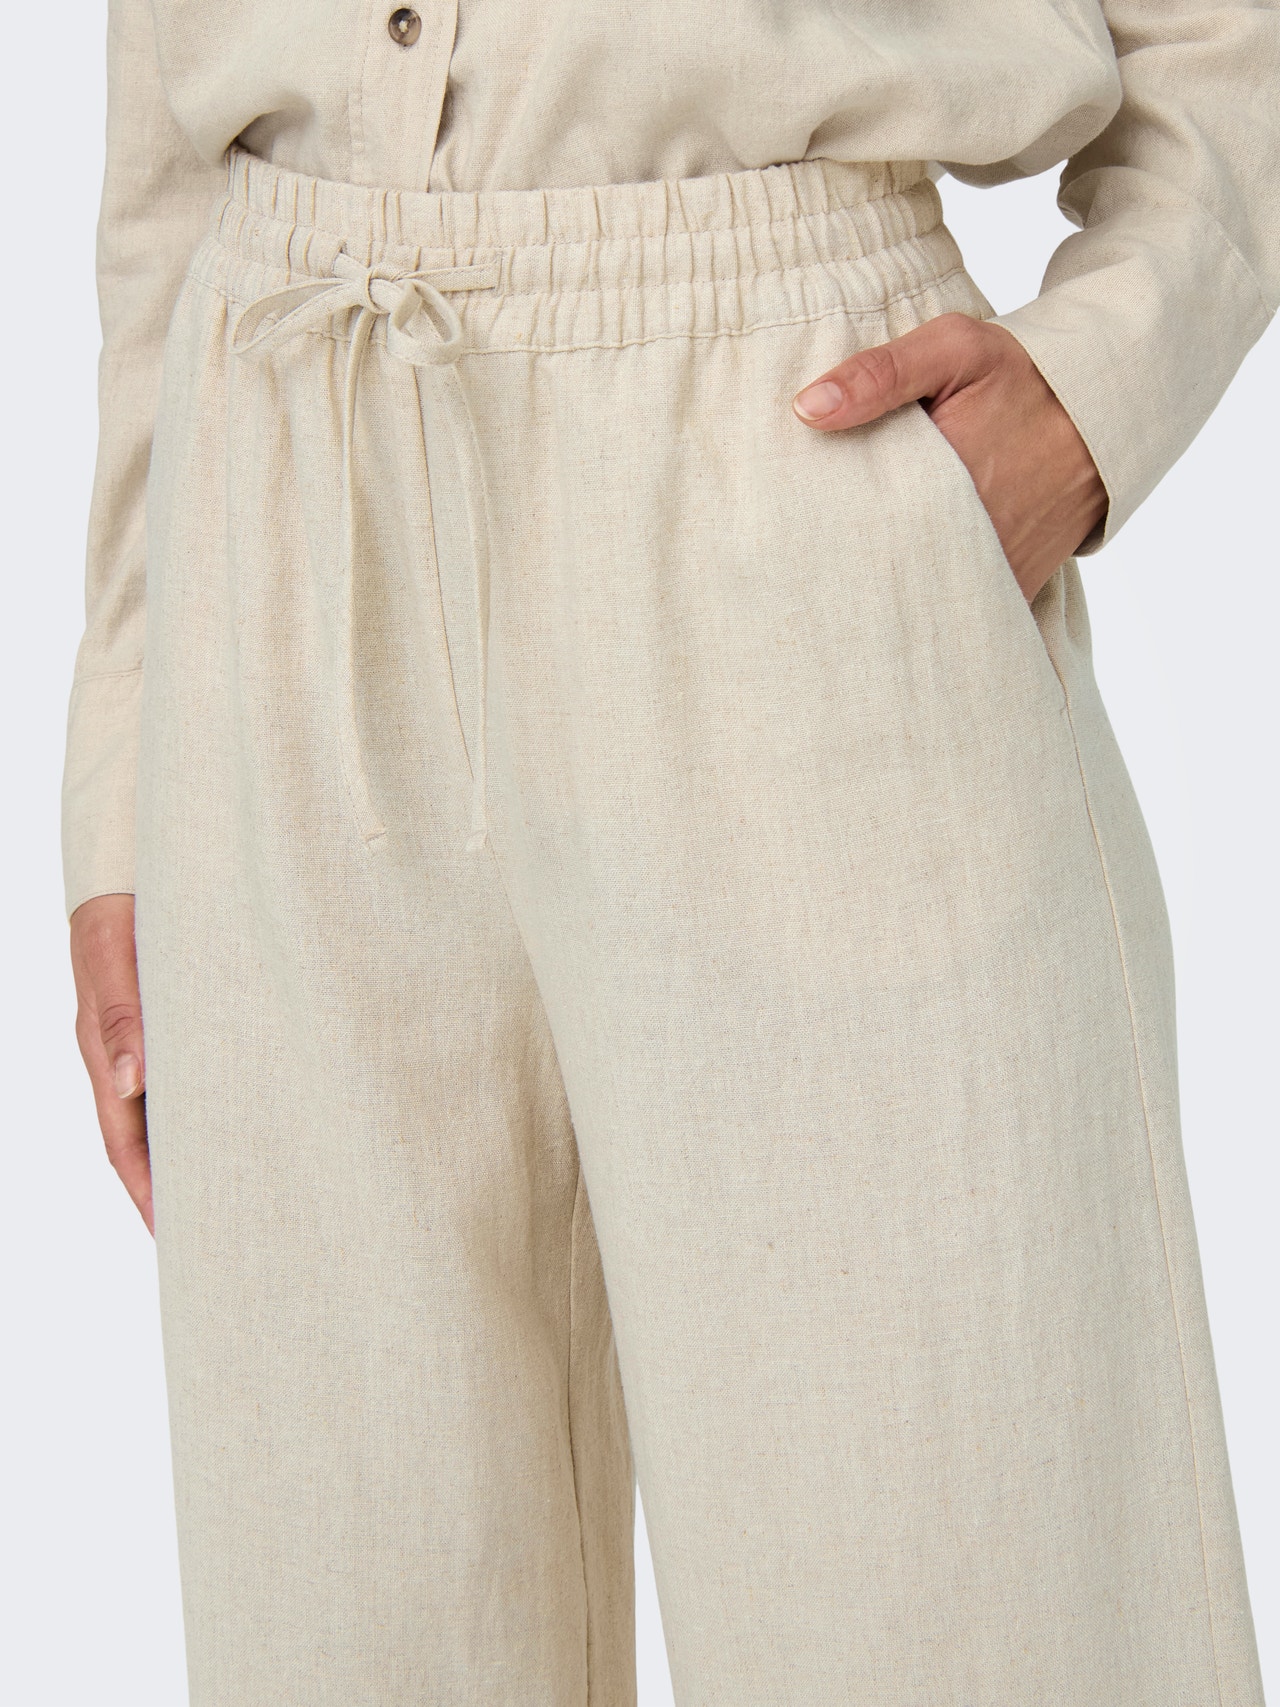 ONLY Classic trousers with high waist -Oatmeal - 15318361